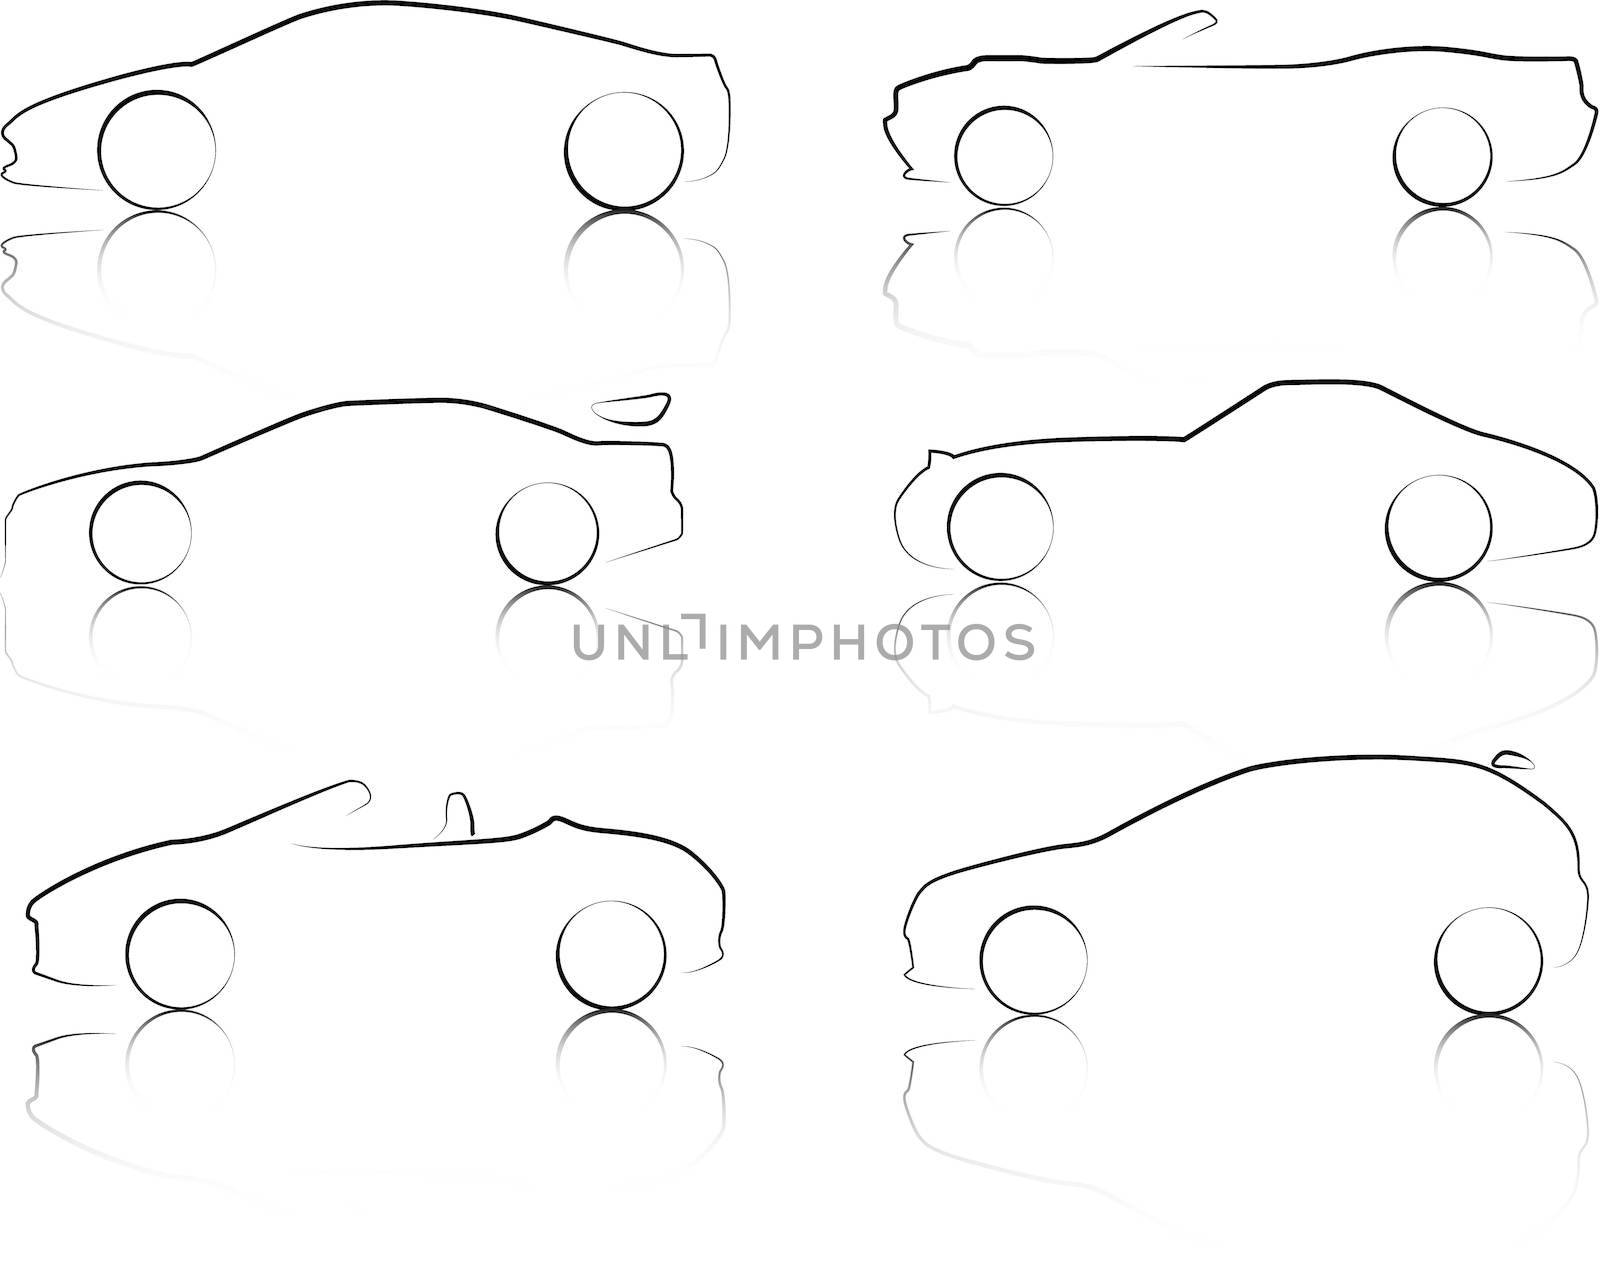 An Illustration of Outlines of Cars